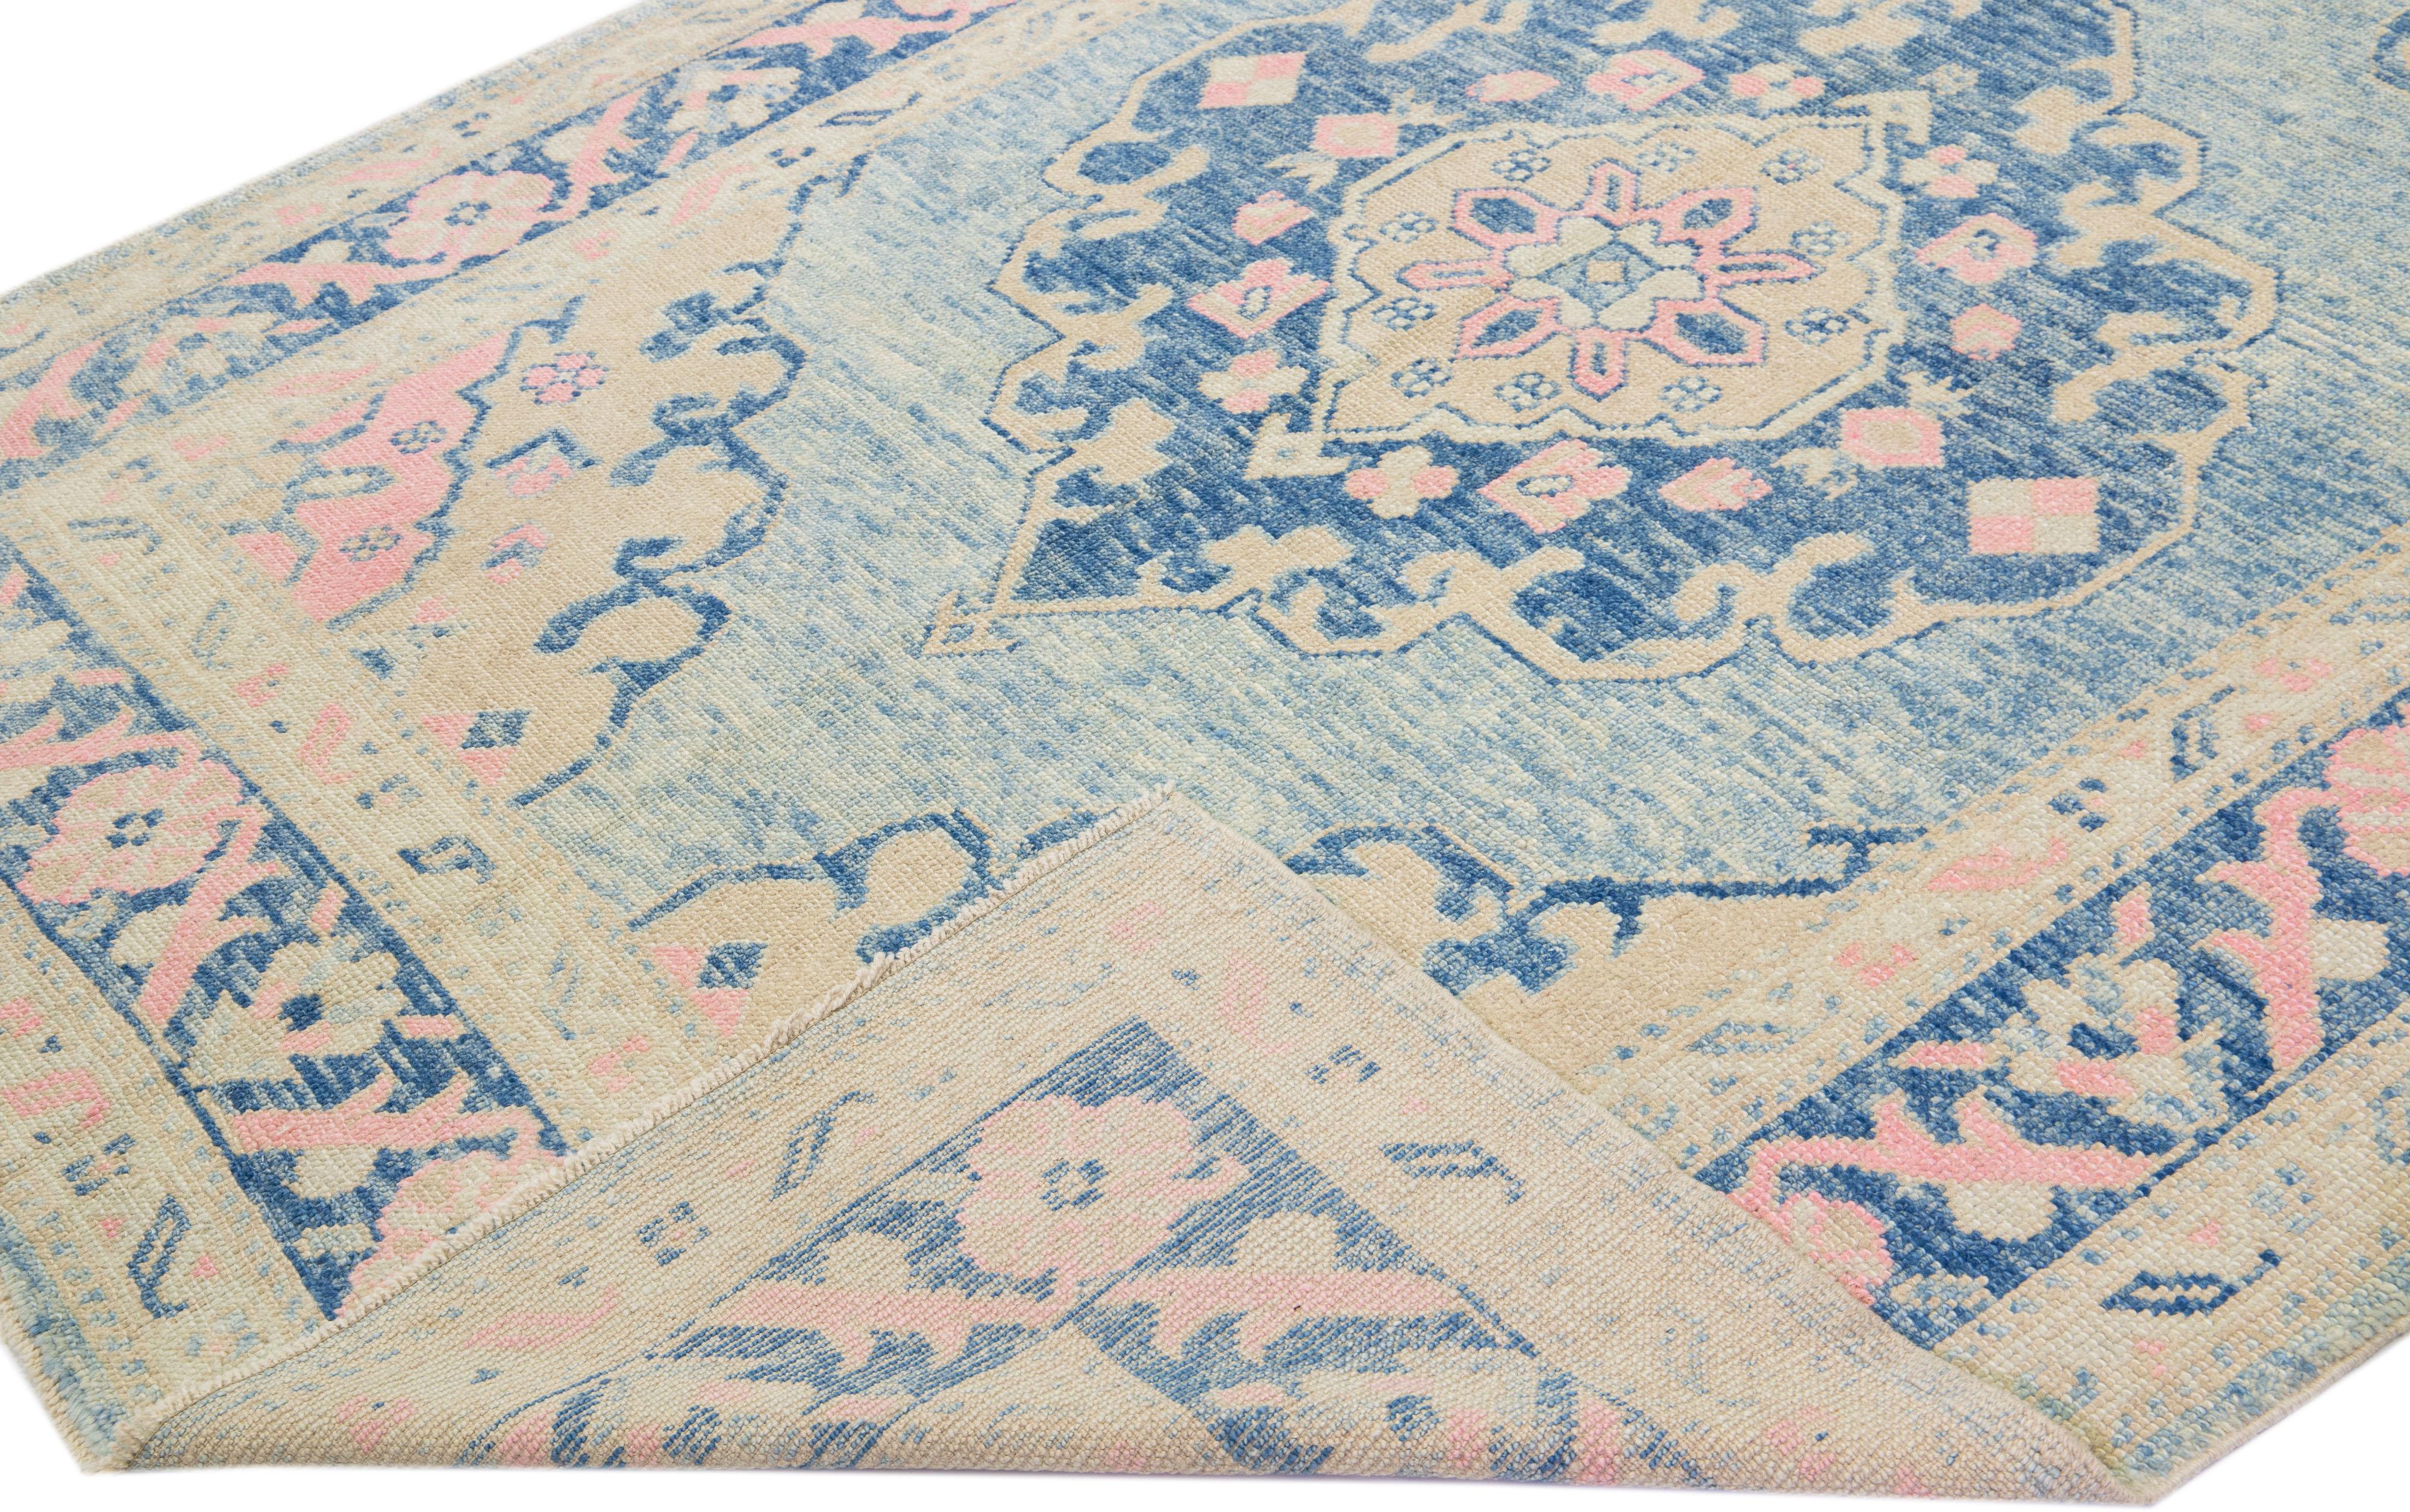 Beautiful modern Oushak hand-knotted wool rug with a light blue color field. This Turkish Piece has a navy blue frame with beige and pink accent colors in a gorgeous medallion floral design.

This rug measures: 6'9